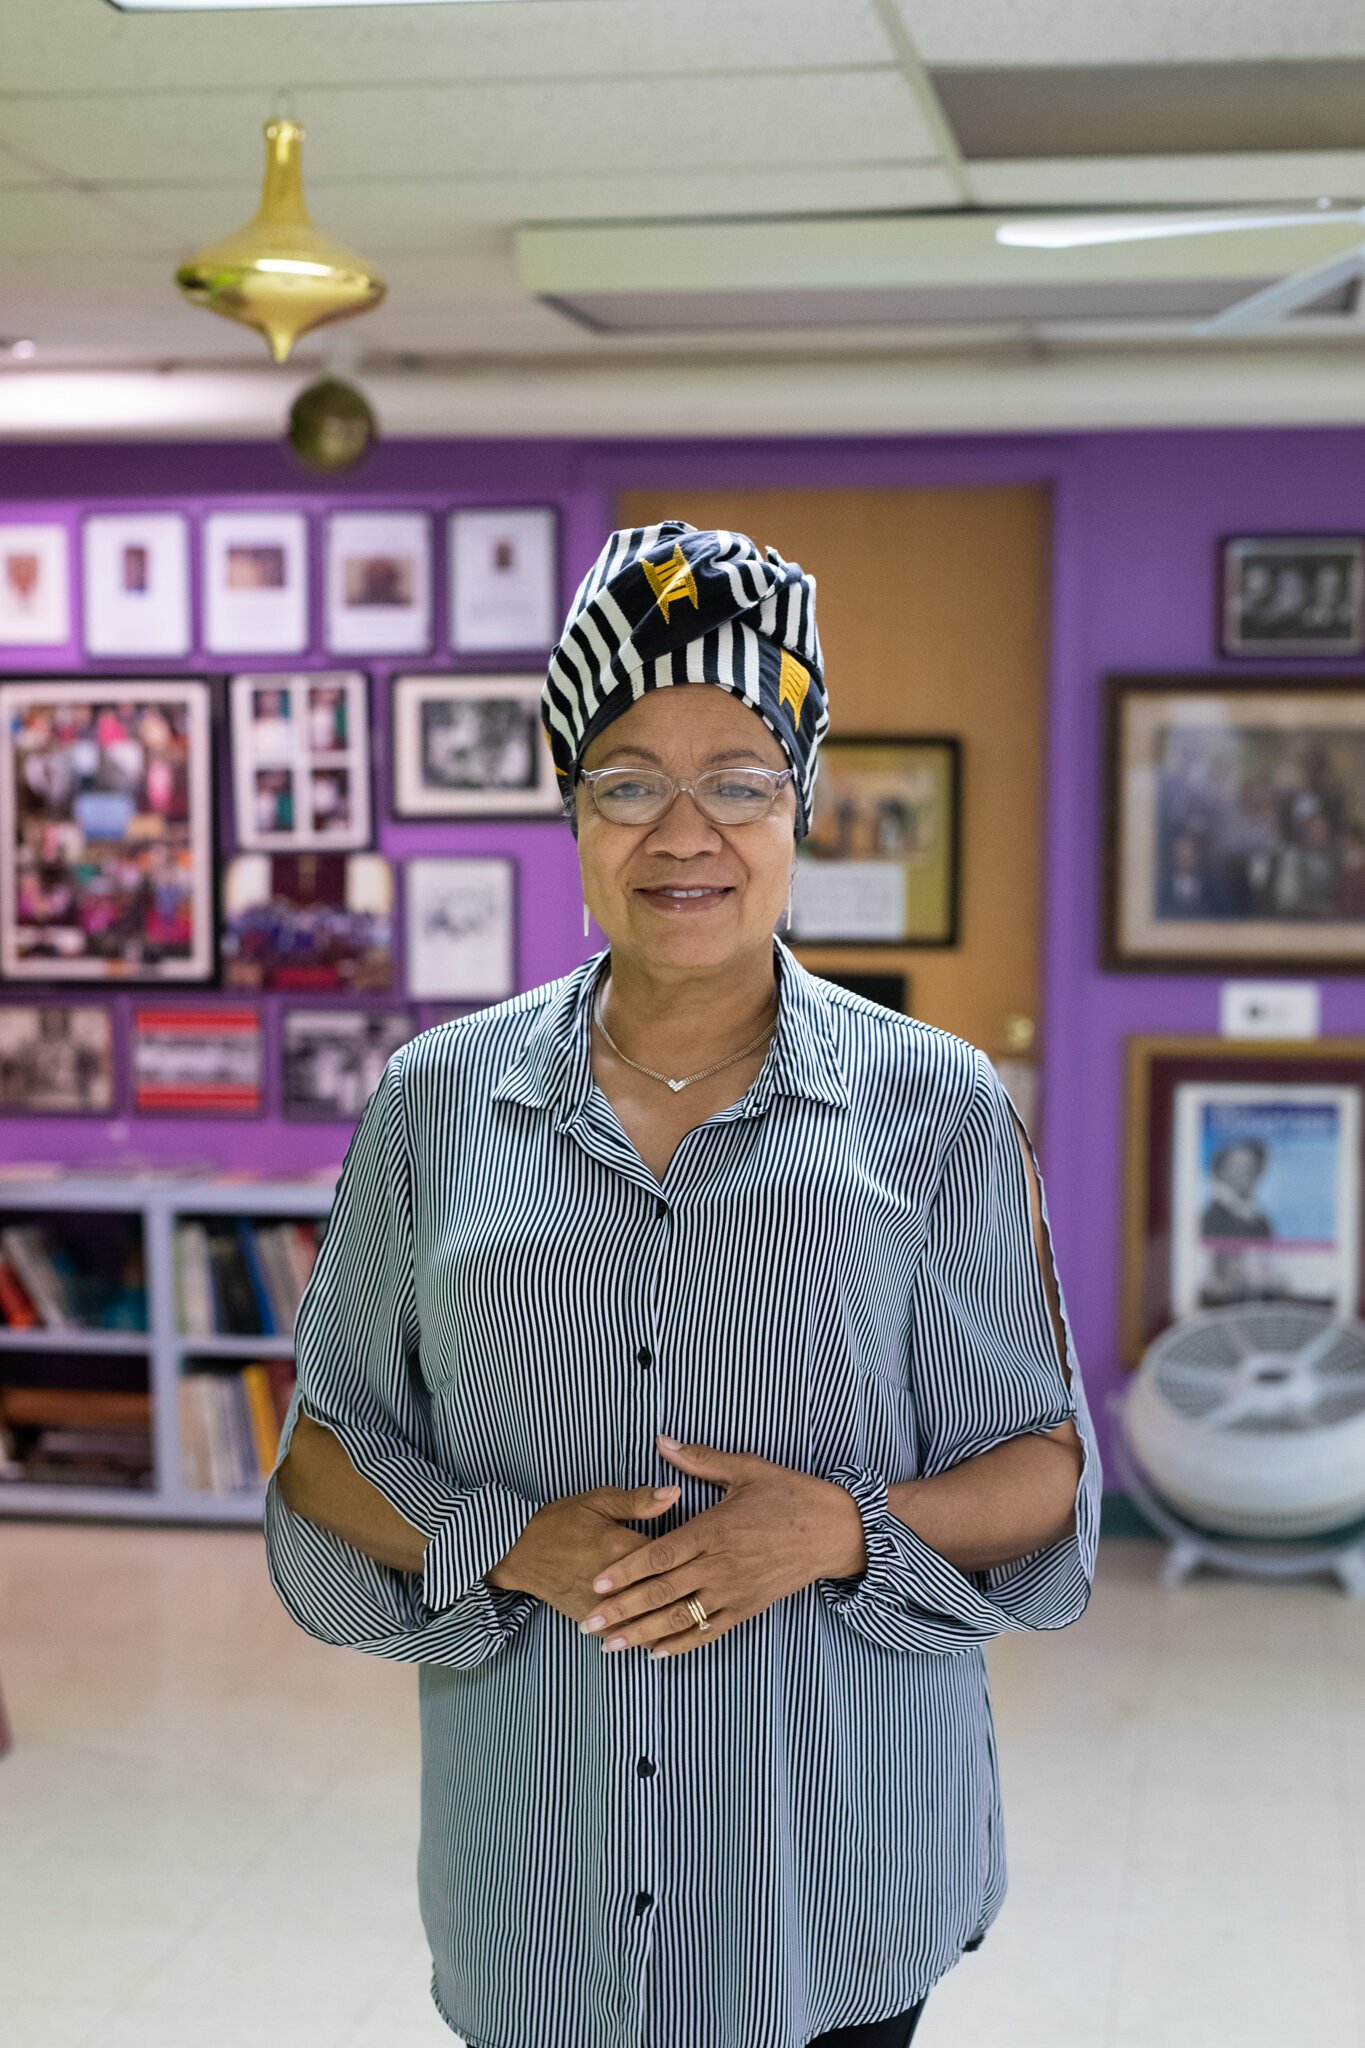 Condra Ridley is an Elders Committee Member for Juneteenth in 2021.